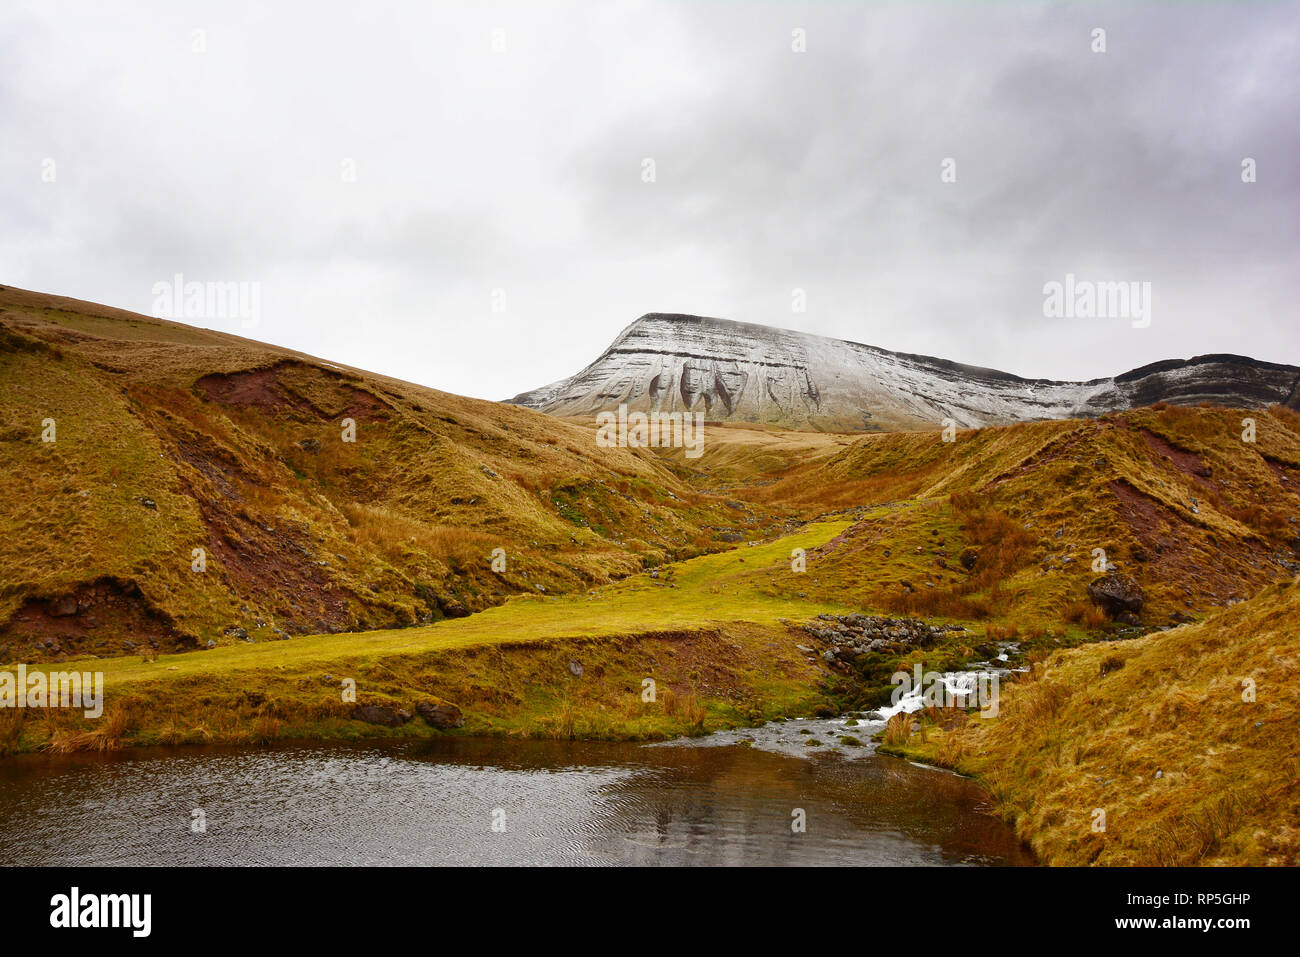 Picws Du covered in snow during winter, Brecon Beacons National Park, Wales Stock Photo